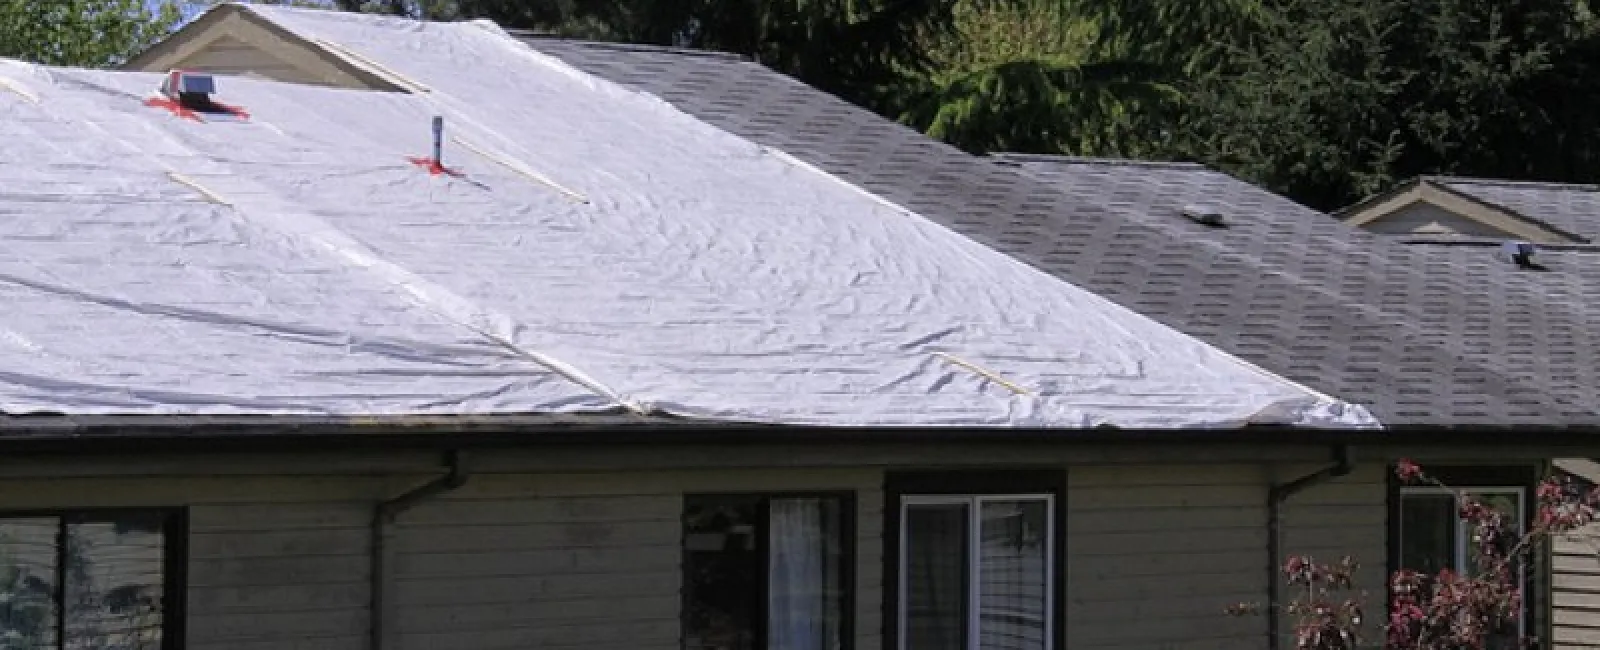 Potential Cost of a Leaking Roof: What it really adds up to.